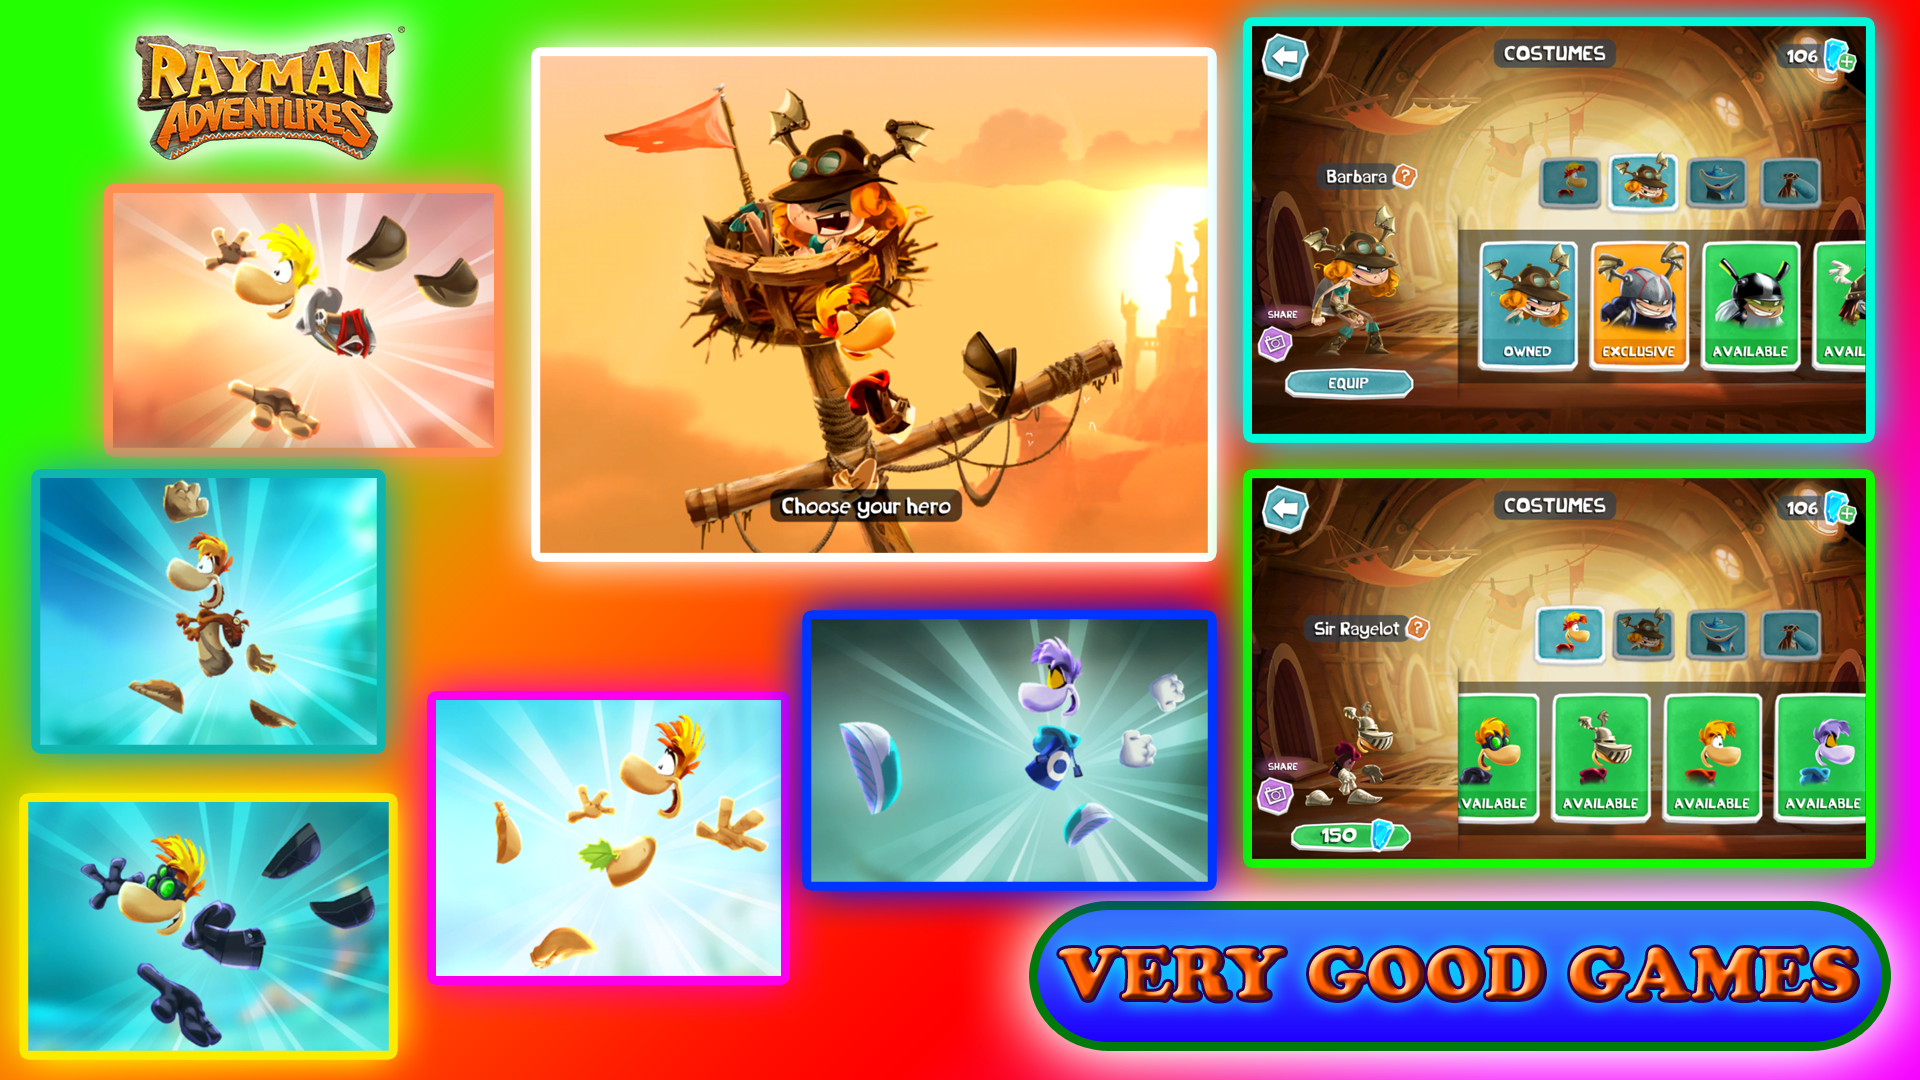 Screenshots from Rayman Adventures with game heroes